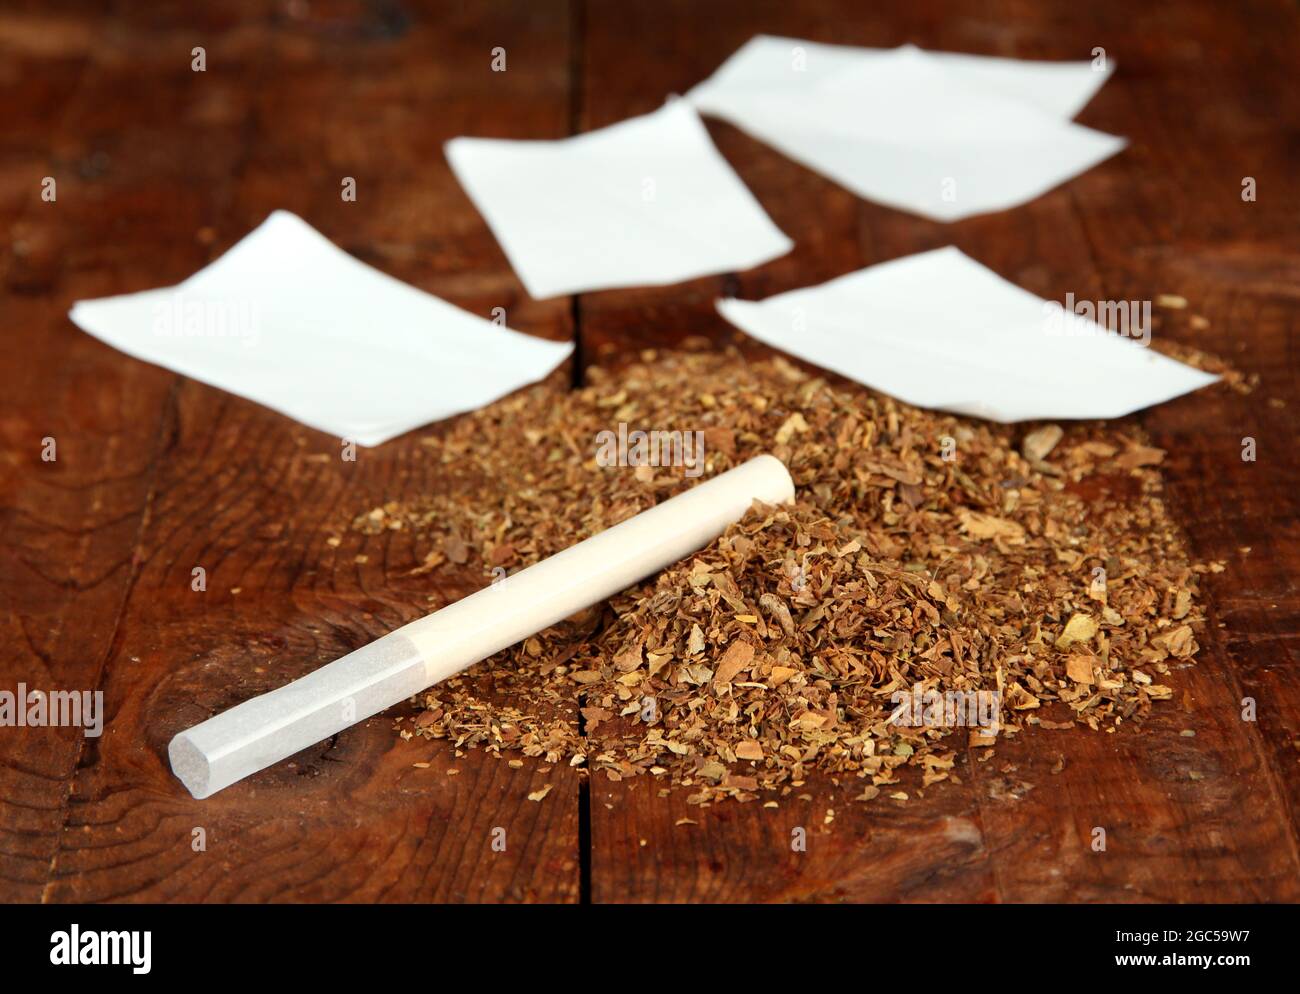 https://c8.alamy.com/comp/2GC59W7/tobacco-and-rolling-paper-on-wooden-background-2GC59W7.jpg